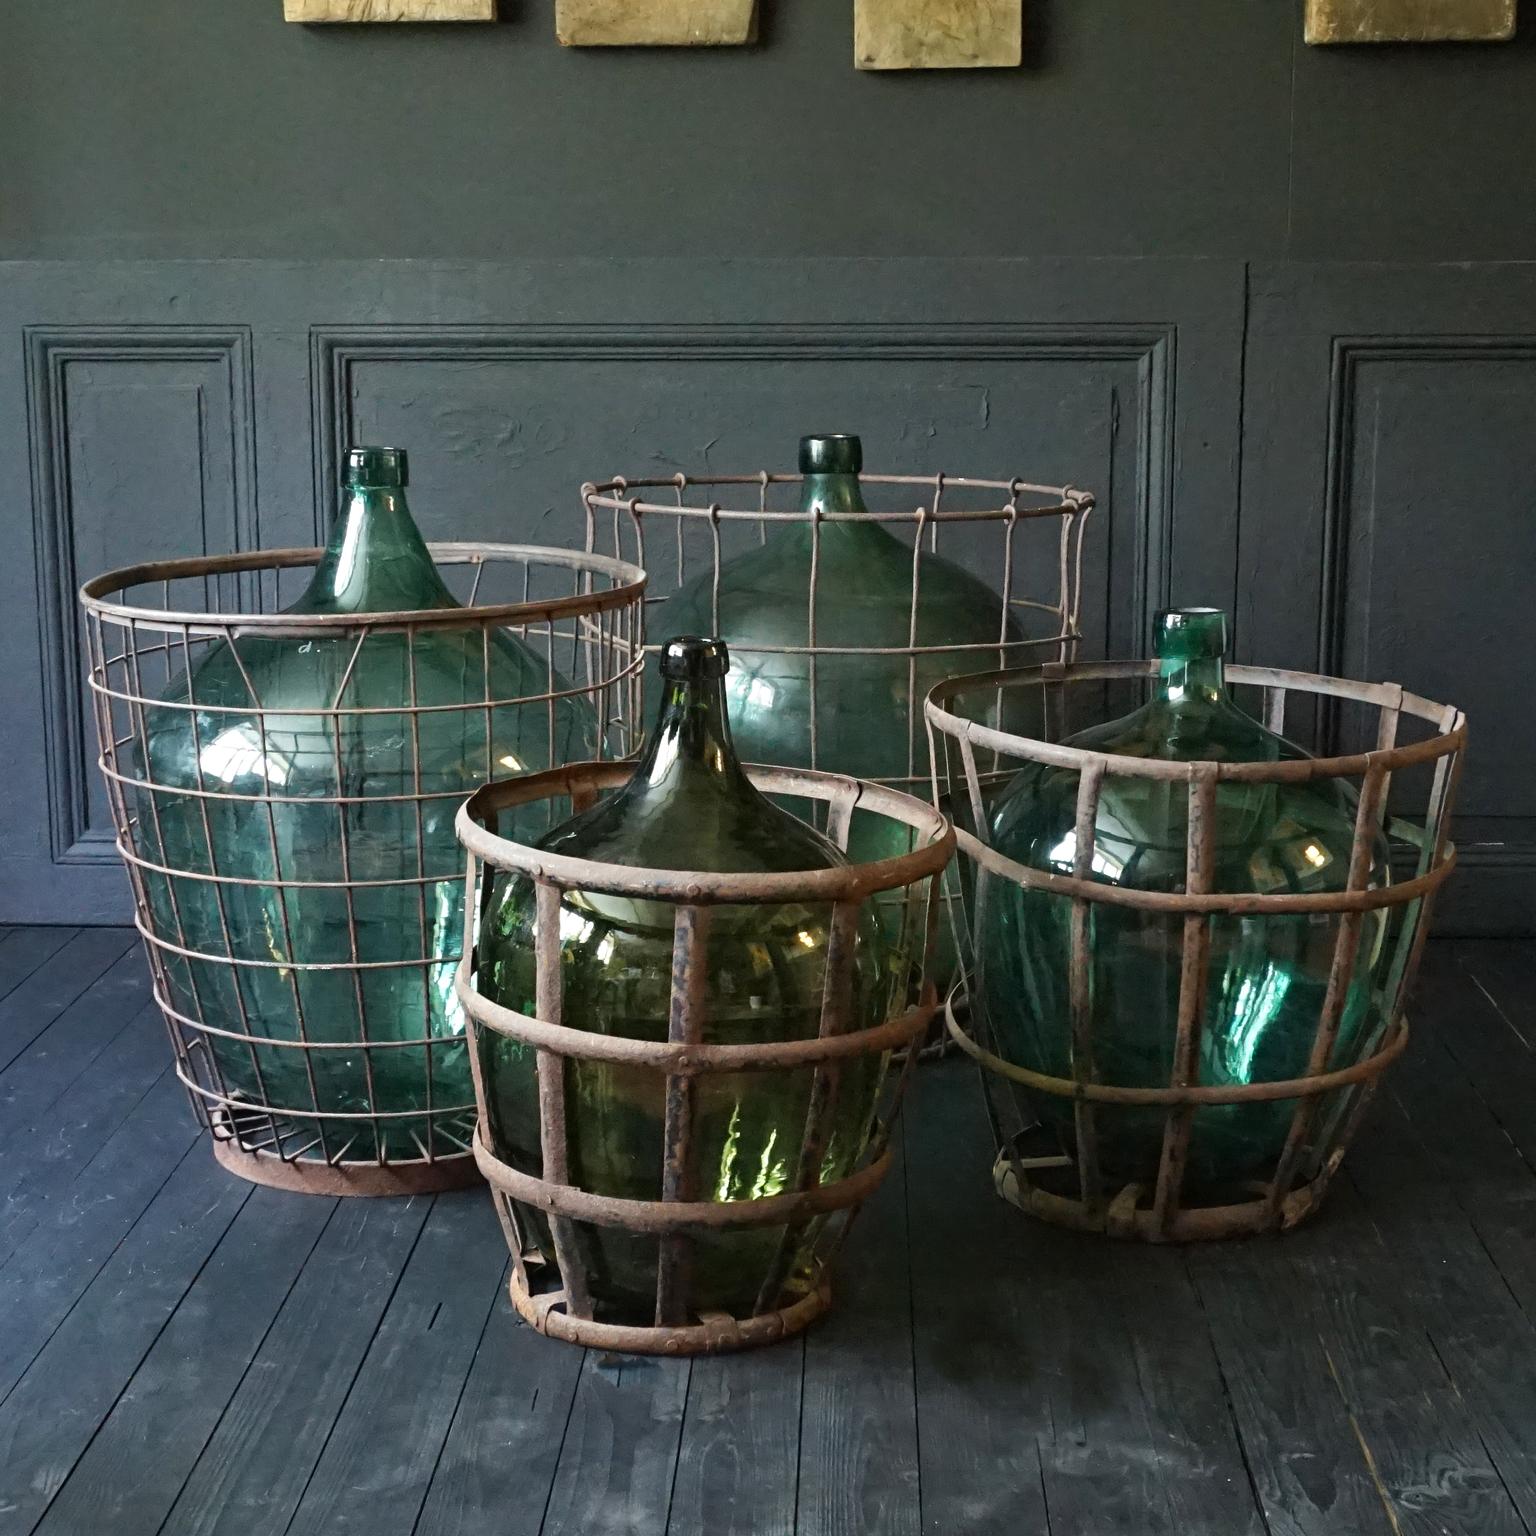 Very decorative set of 4 antique green hand blown and glass bottles also known as Demijohn, Lady Jeanne, Dame Jeanne or Carboy. 
Bottles like this were primarily used to hold liquids such as wine, cognac or brandy.
The metal baskets were to